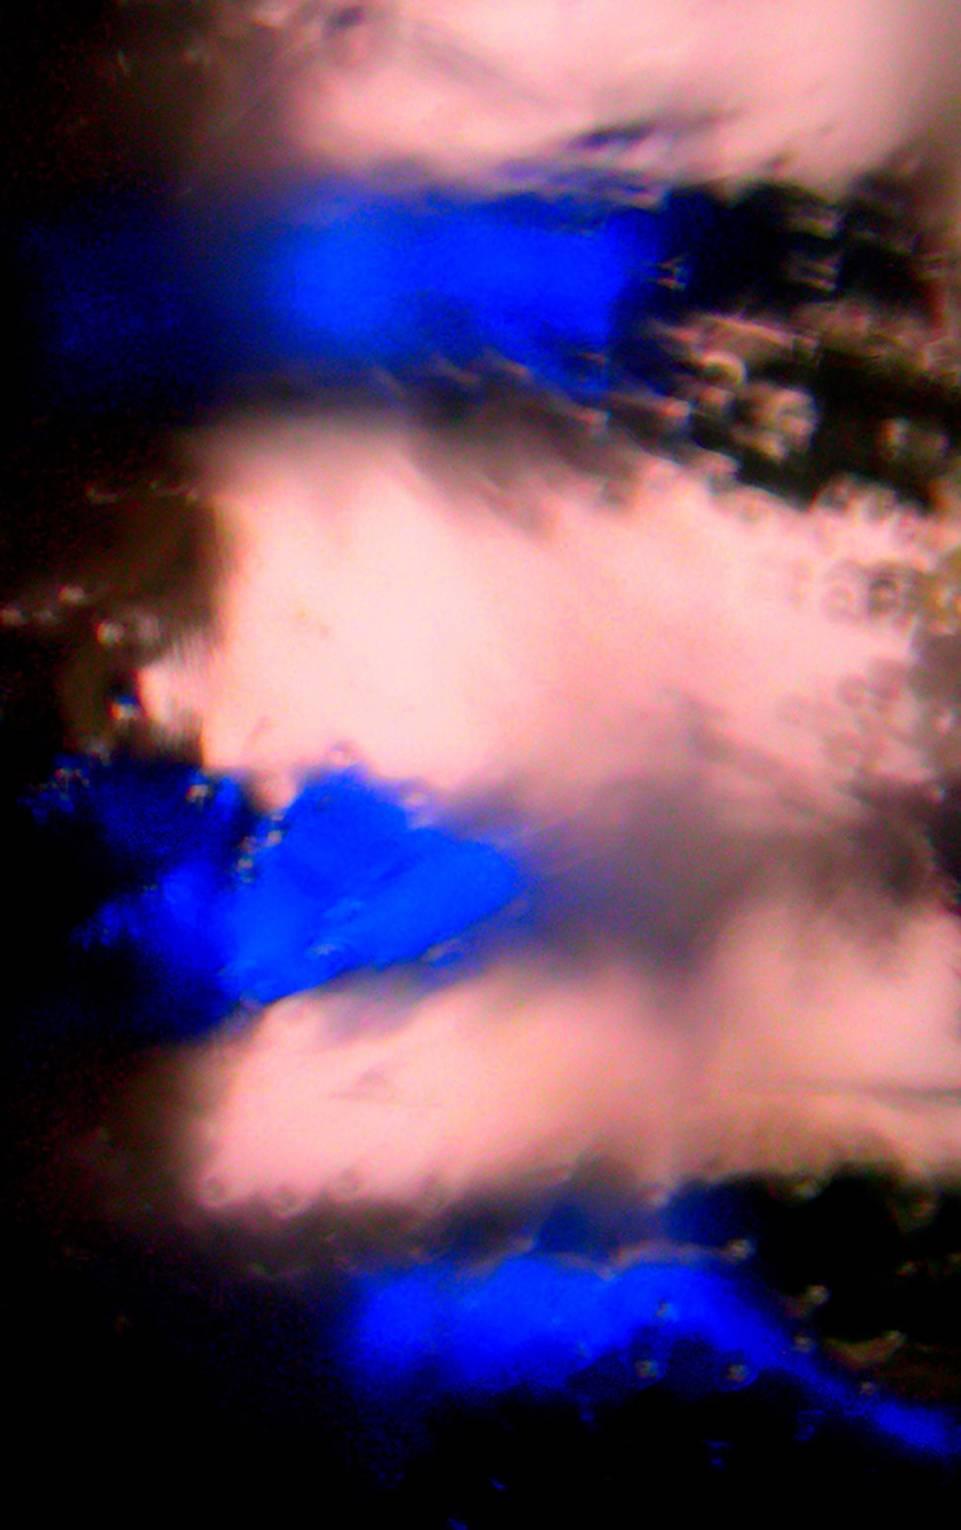 Cate Woodruff Color Photograph - “Blue Notes”,  photographs brilliant  blue reflections in pink sunset light